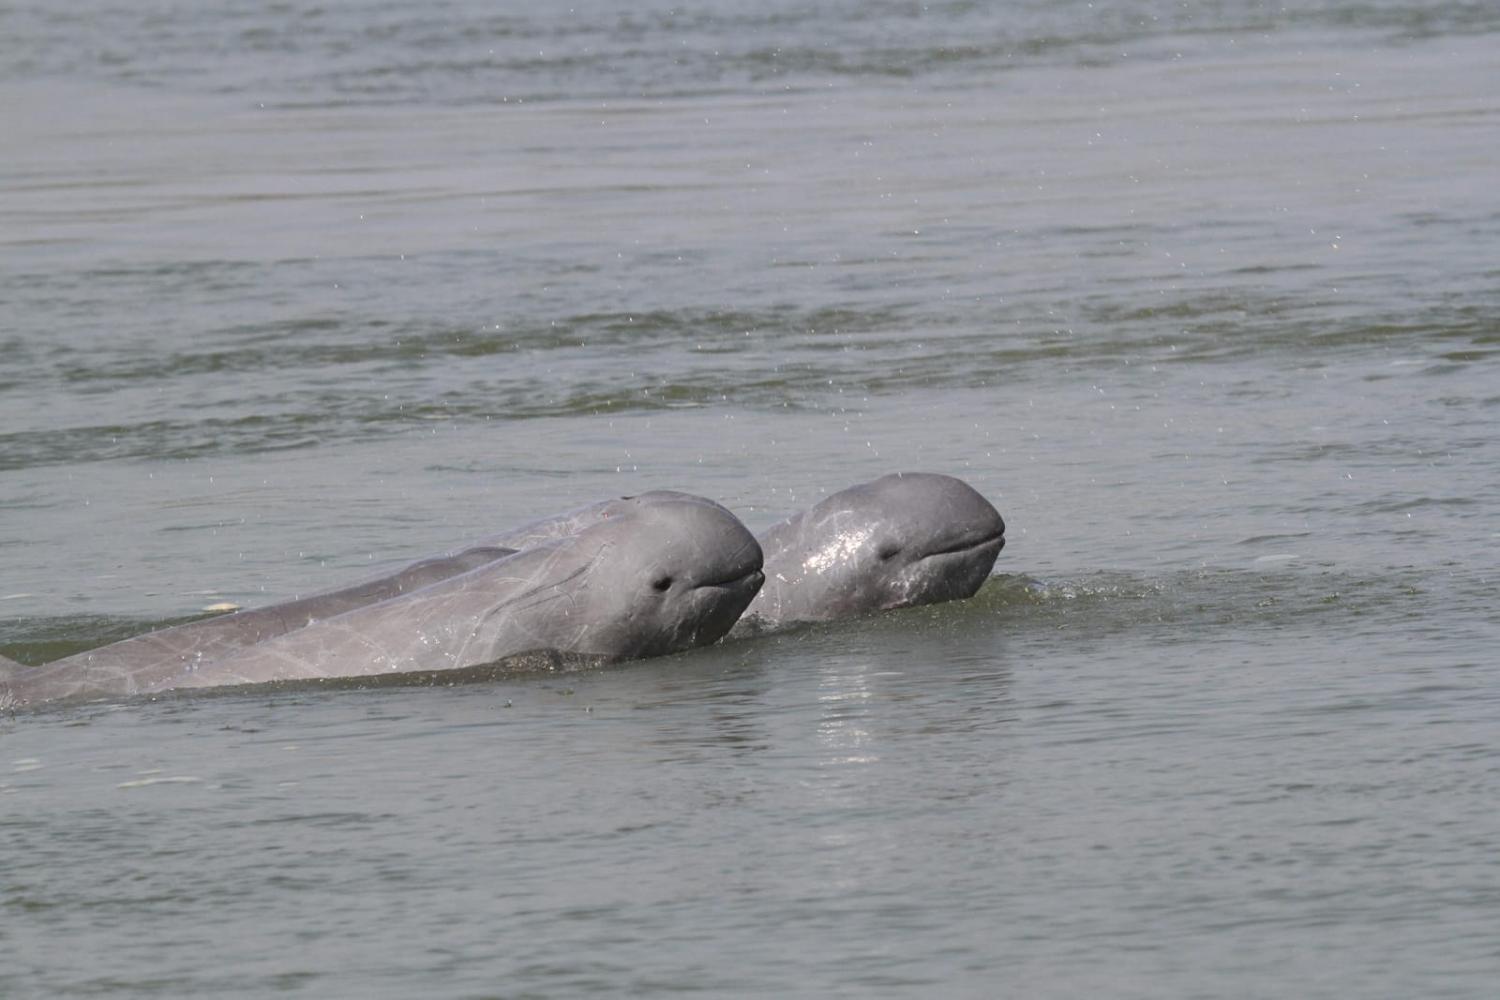 Irrawaddy dolphins in the Mekong River, northeast Cambodia, a critically endangered population (WWF-Cambodia via Xinhua/Getty Images)